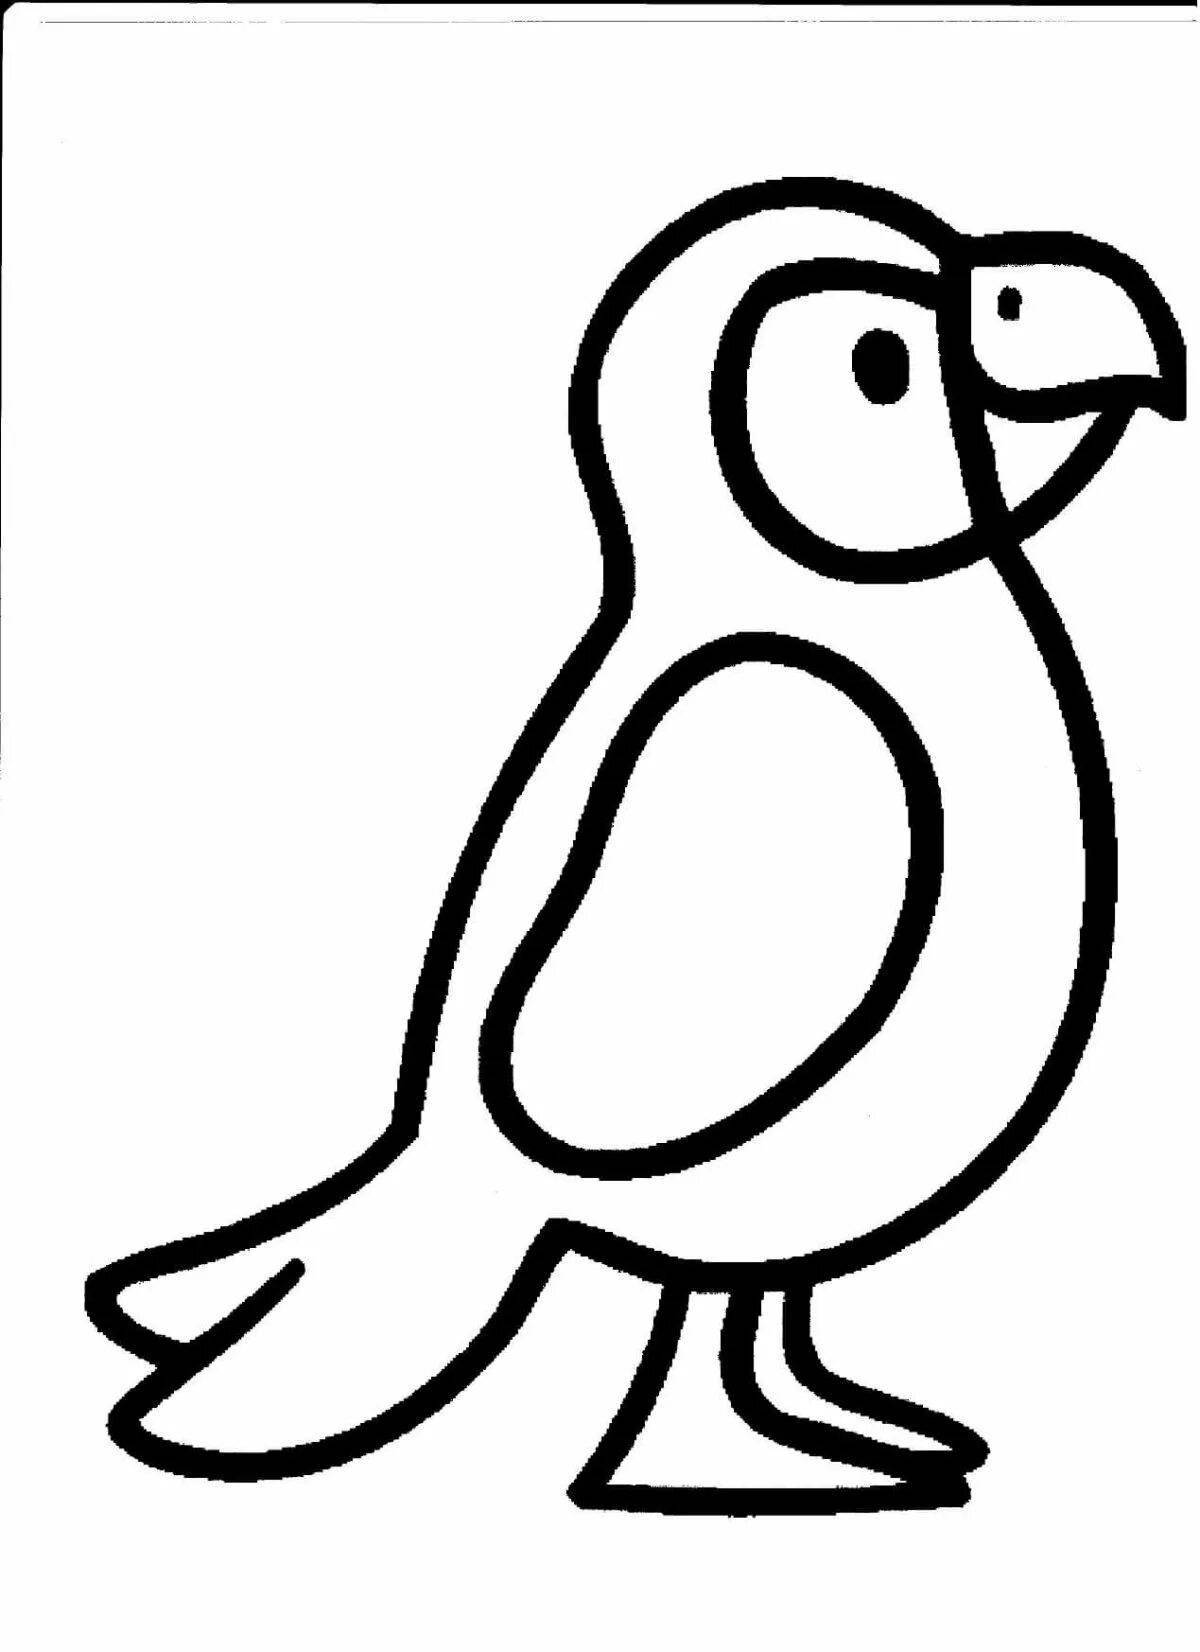 Bright bird coloring page for 2-3 year olds